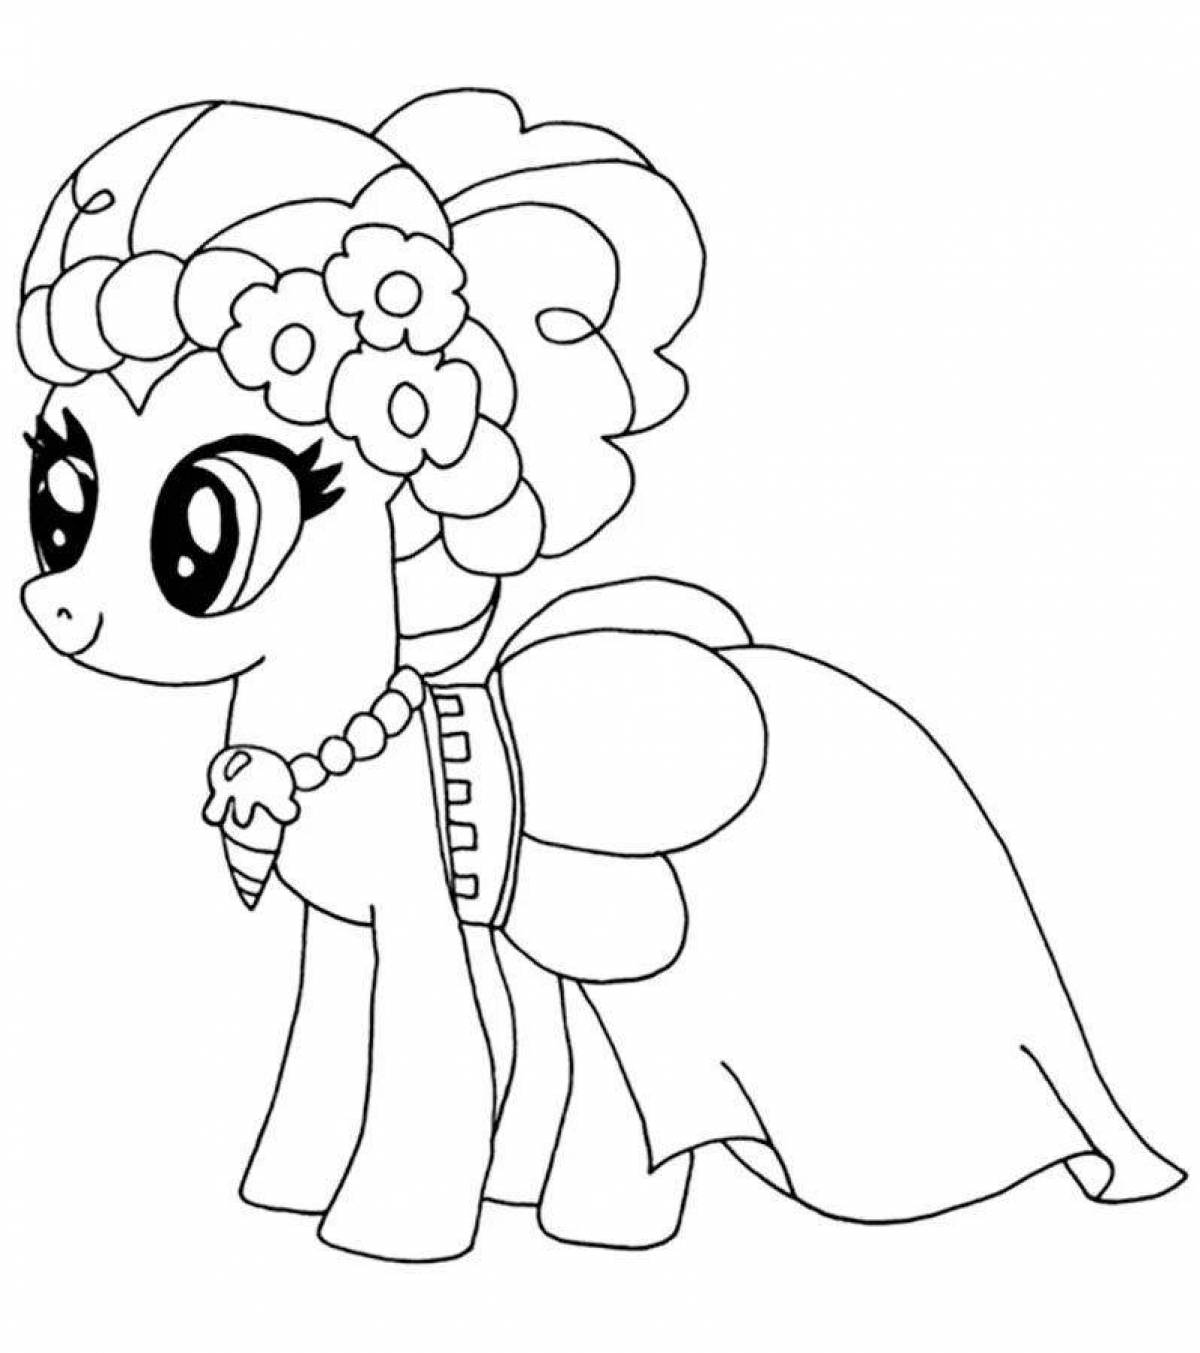 Pinkie Pie's jubilant coloring page